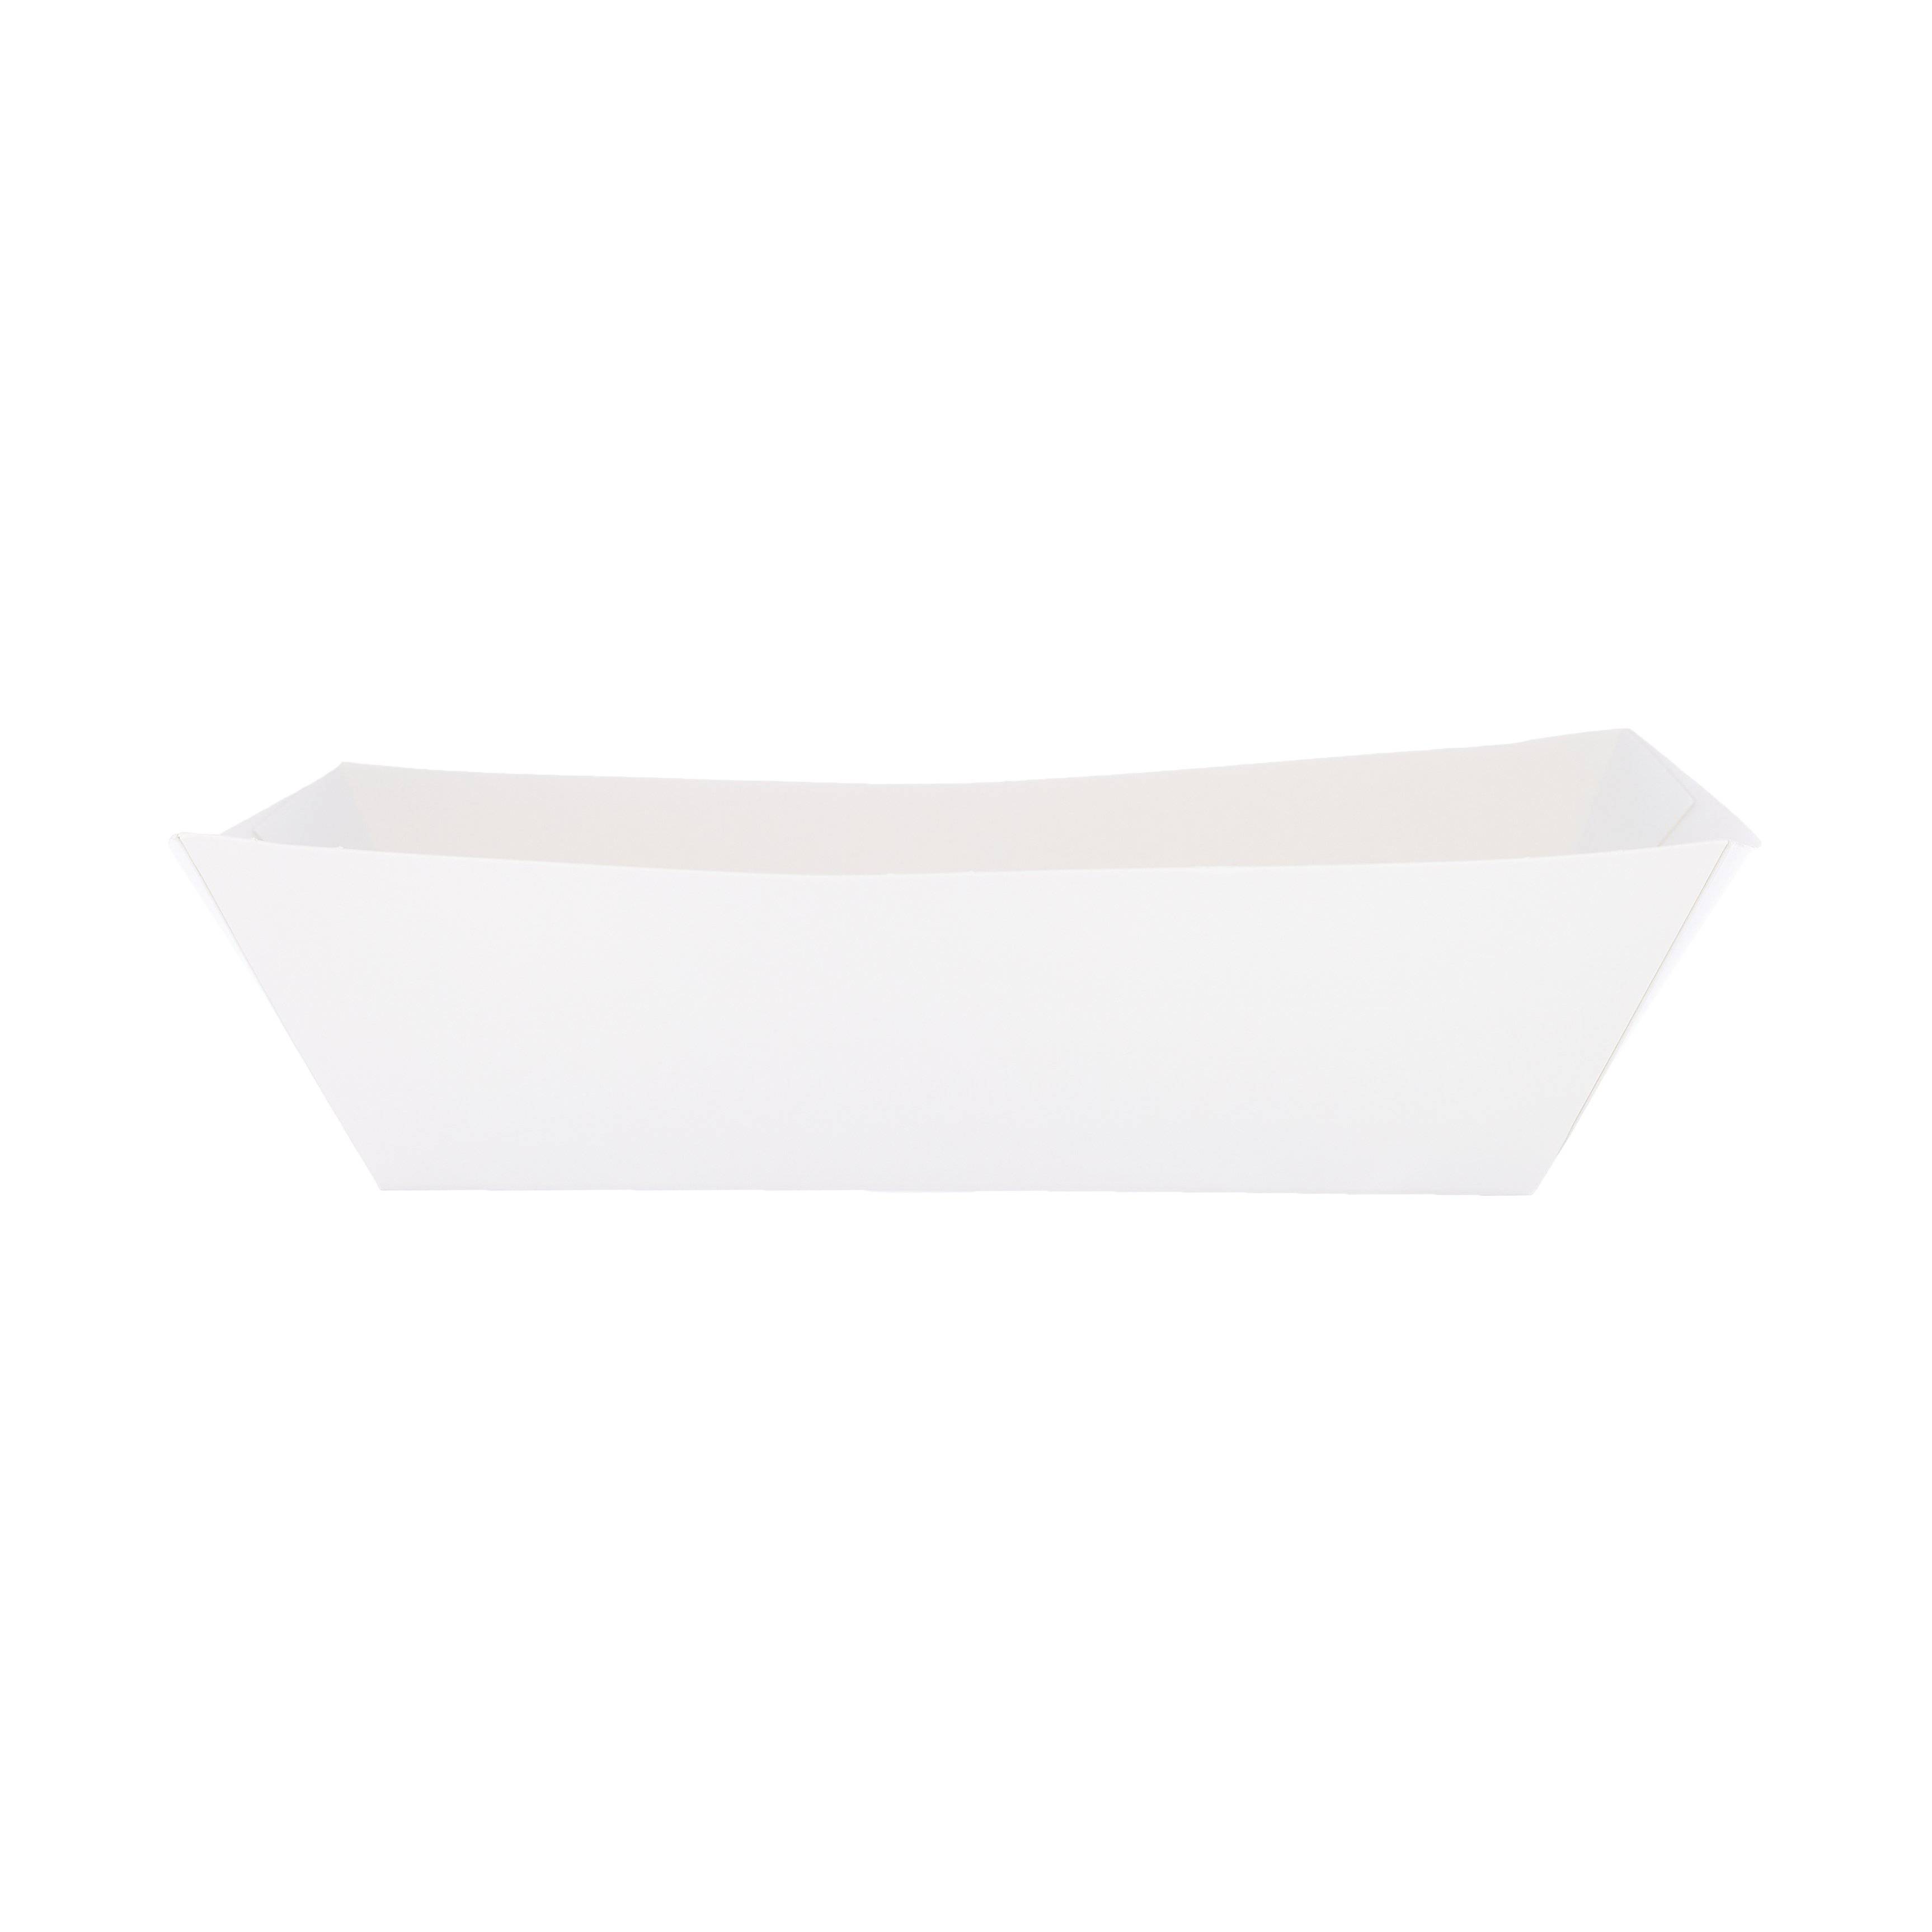 White Paper Boat Tray Large 600 Pieces - Hotpack Global